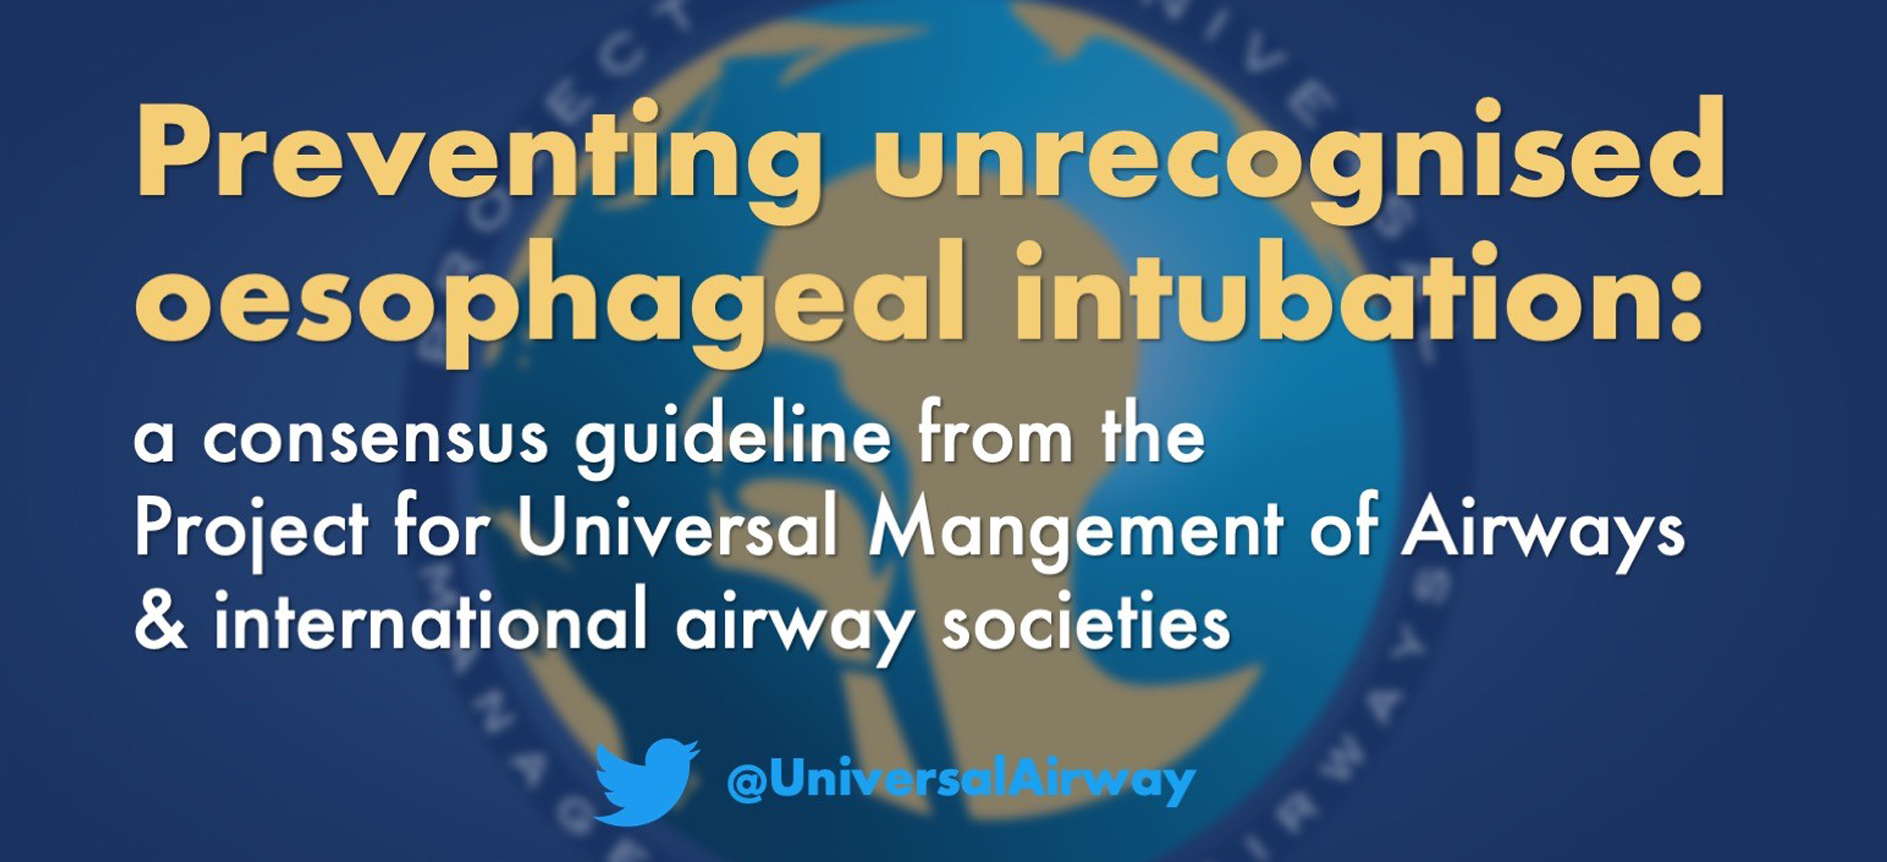 Preventing unrecognised oesophageal intubation guidelines